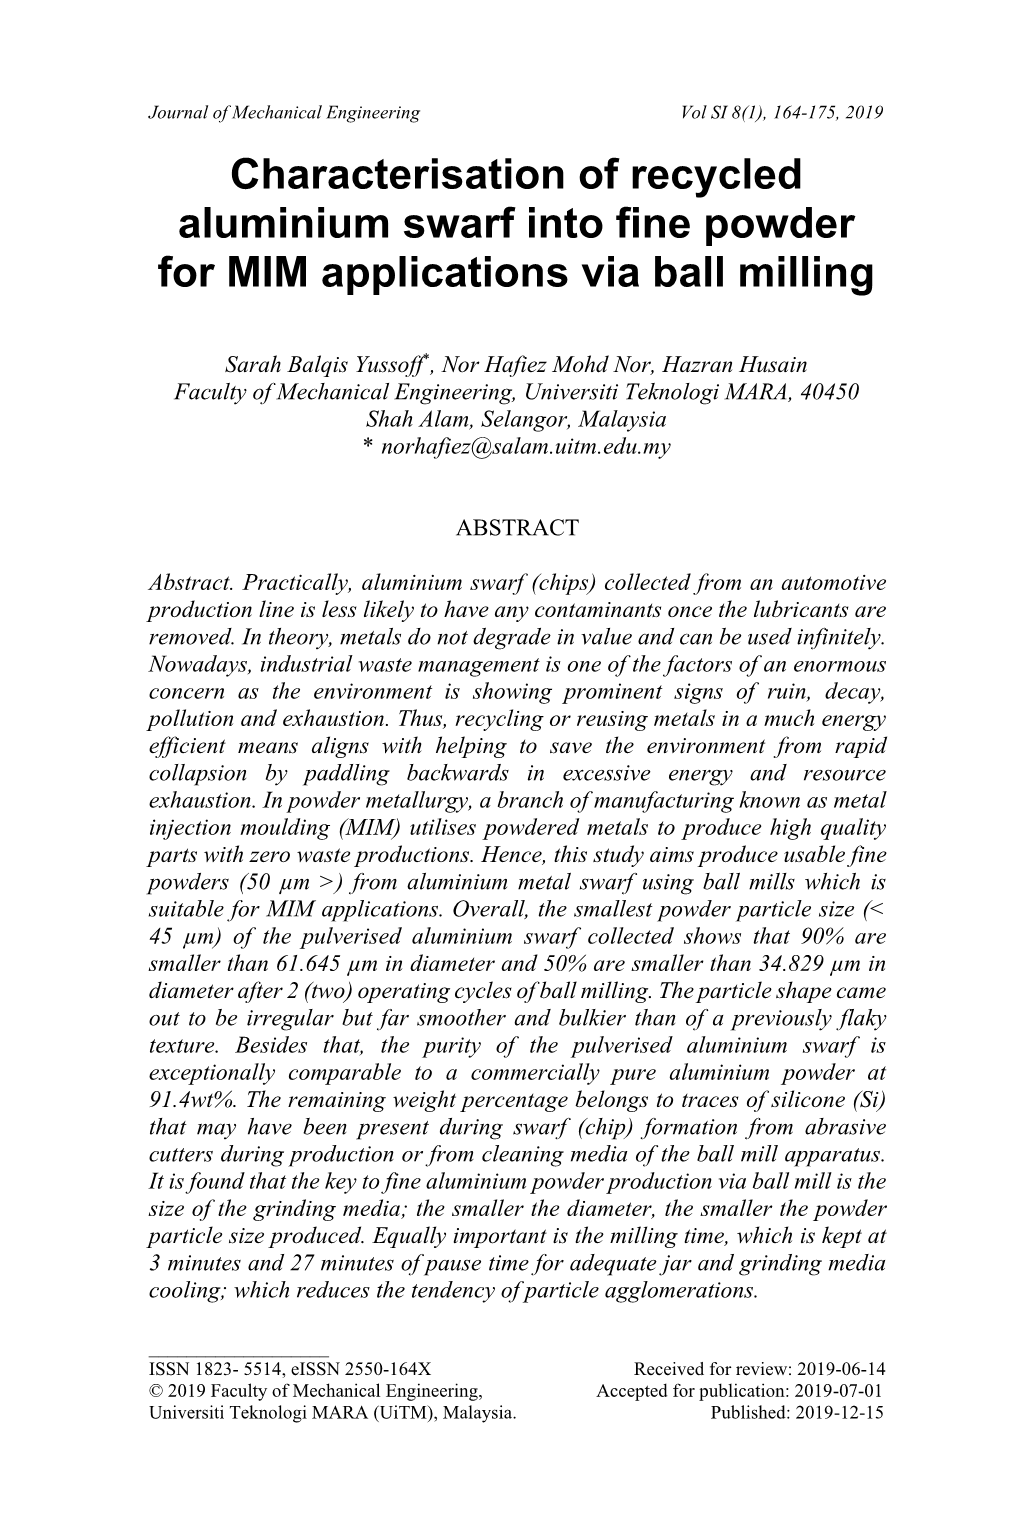 Characterisation of Recycled Aluminium Swarf Into Fine Powder for MIM Applications Via Ball Milling